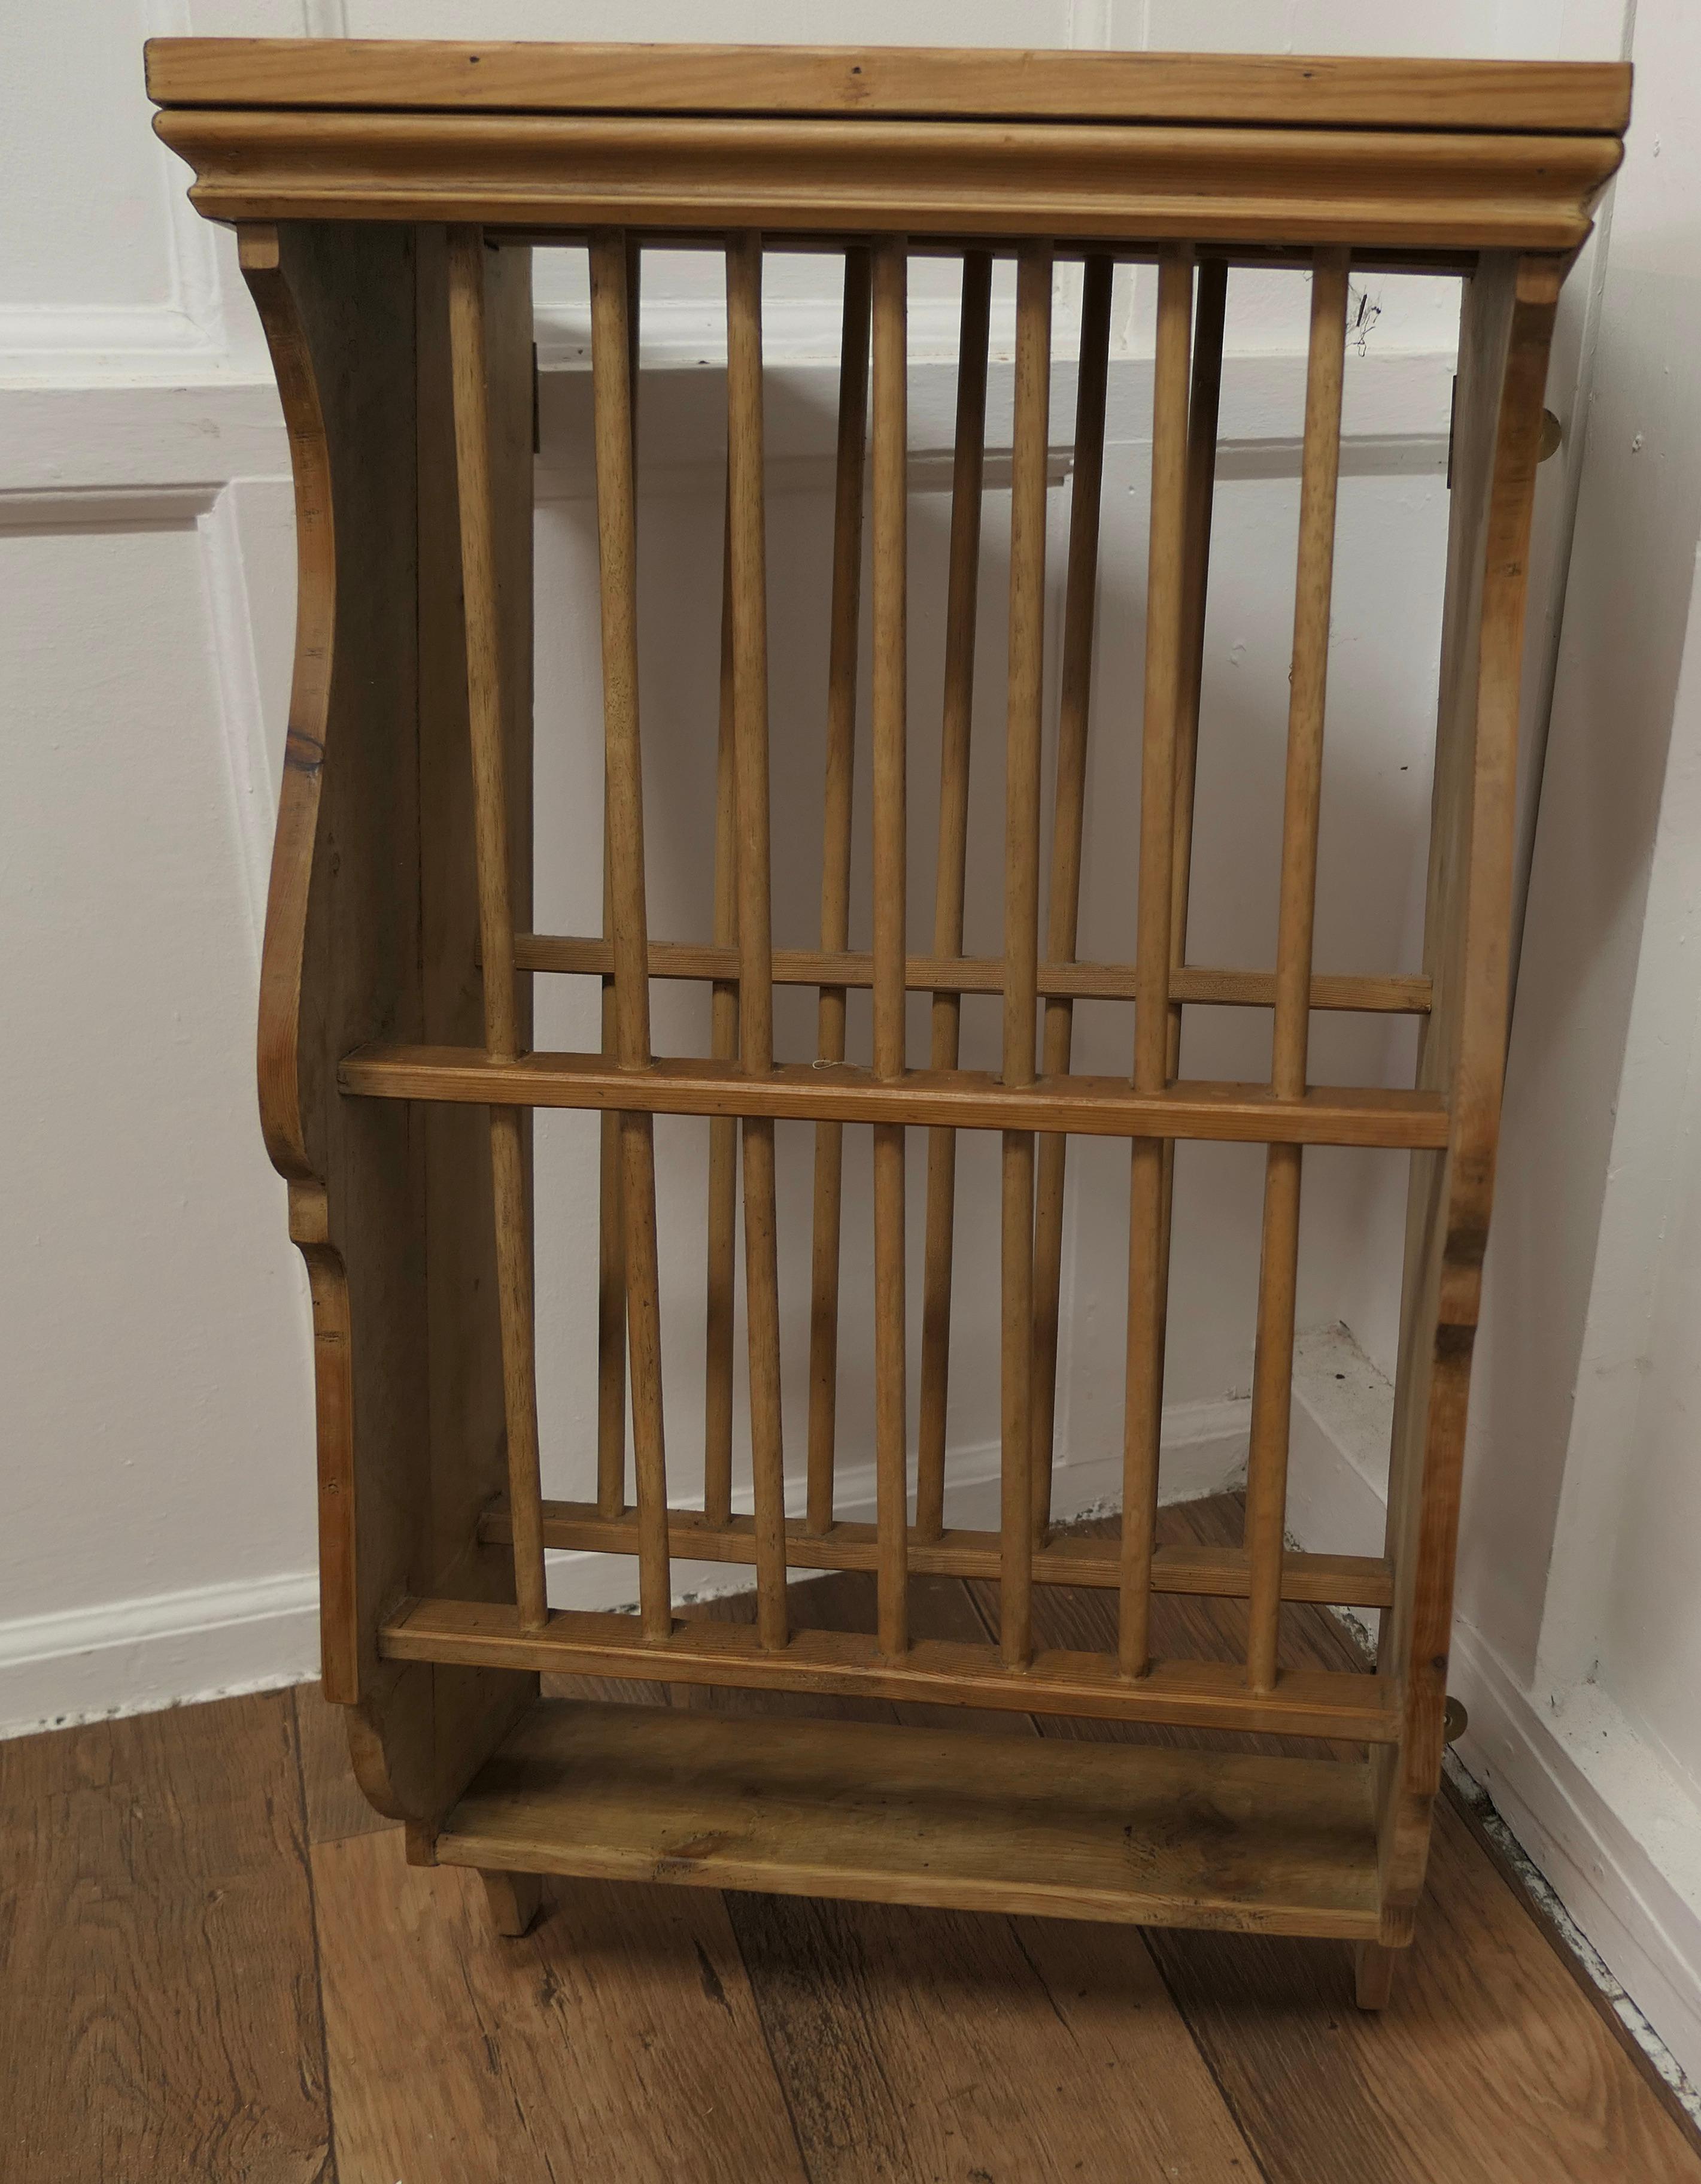 A Pair of Wall Hanging Pine Plate Racks


These useful pieces hang on the wall to drain and store plates until required, it is unusual to find a pair like this
It has a pine frame and wooden dowels with a waterfall shape, allowing 2 rows of